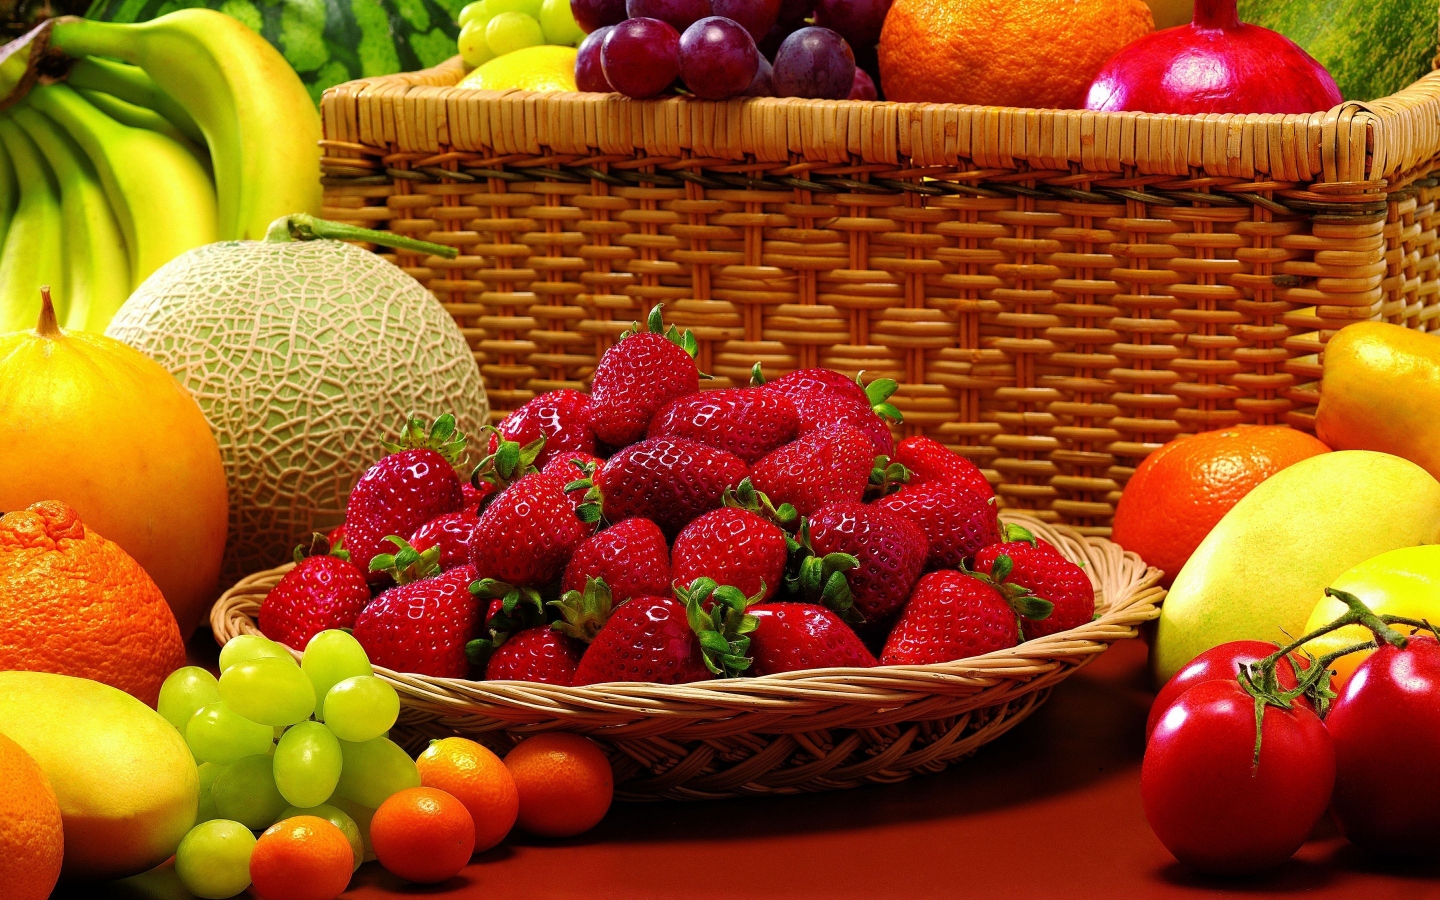 Amazing Fruits for 1440 x 900 widescreen resolution